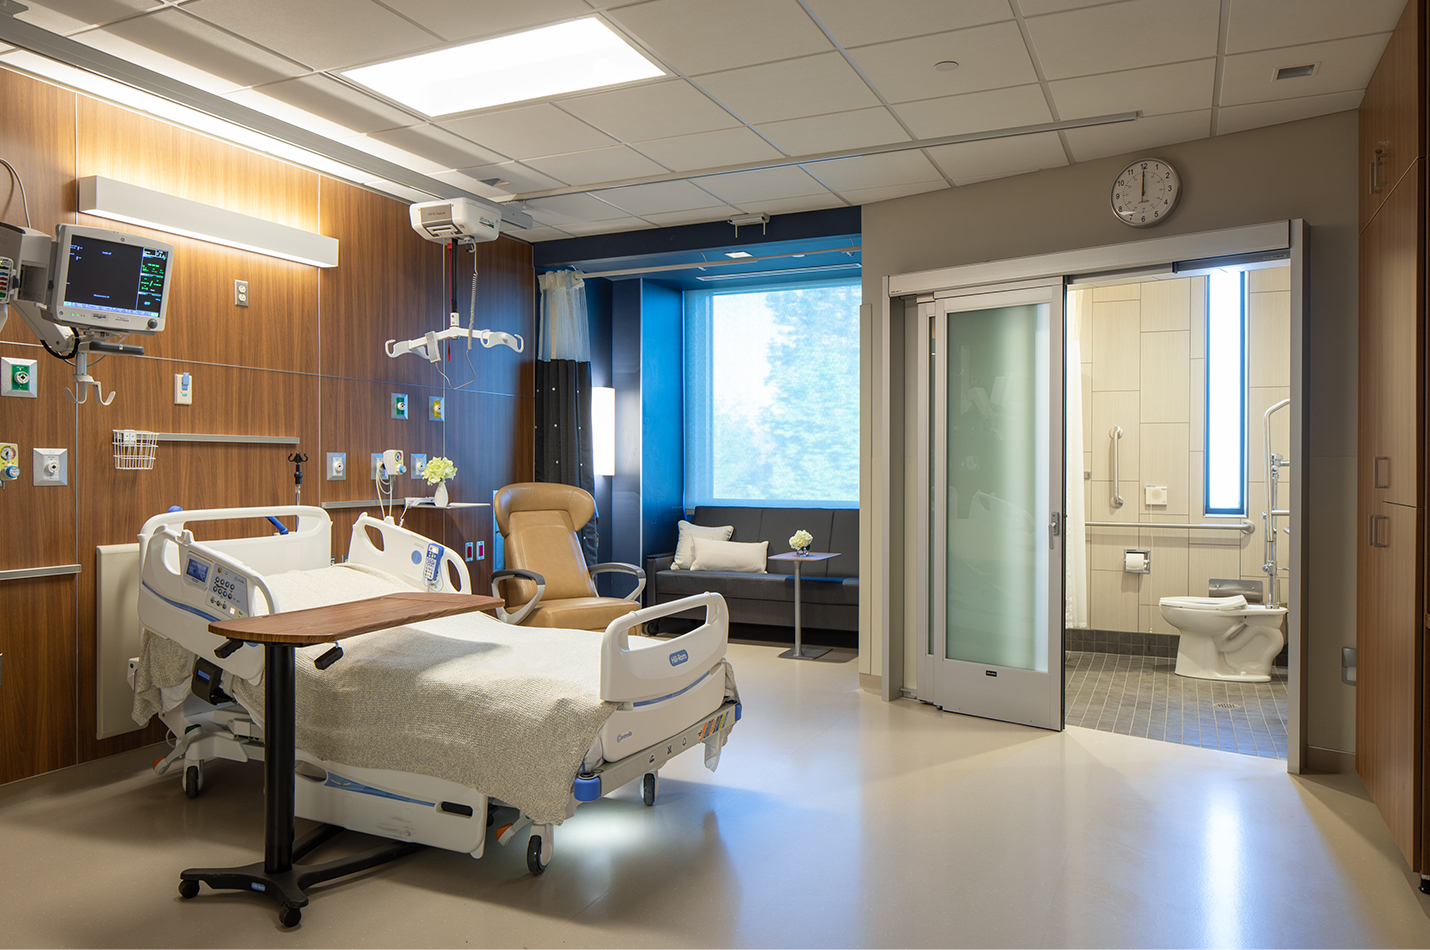 St. Charles ICU Tower Addition | PAE